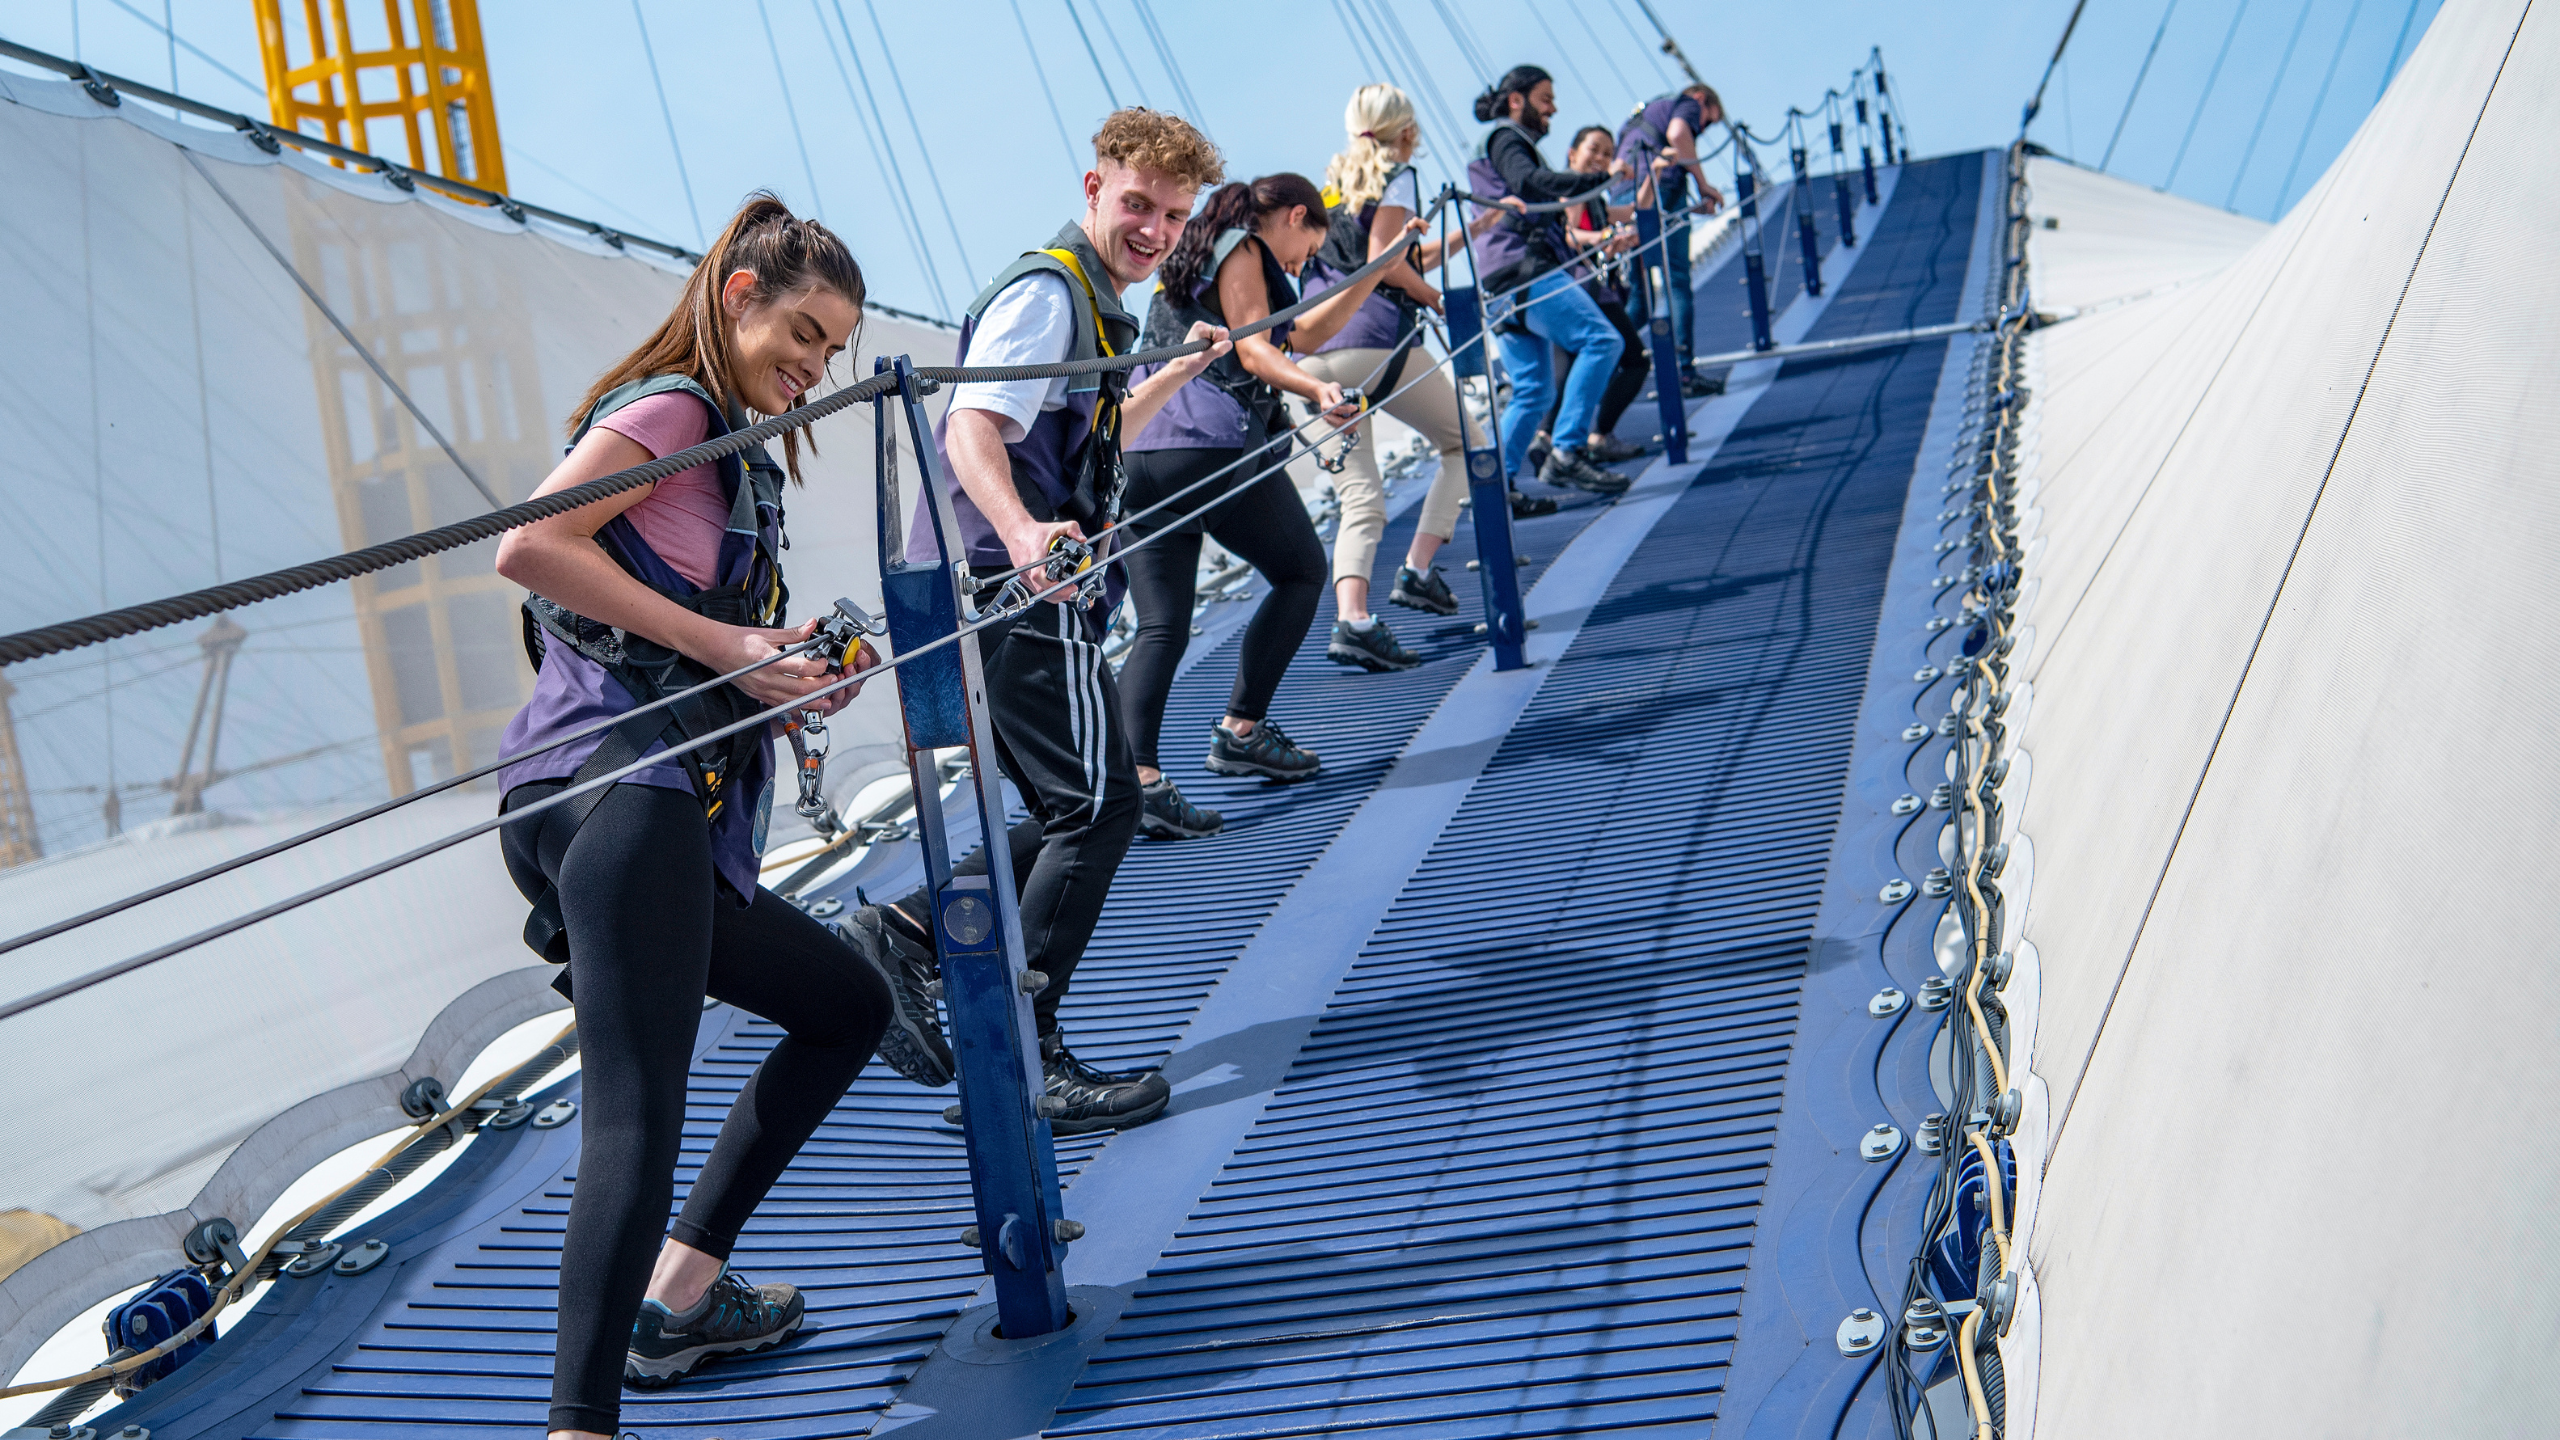 https://londonplanner.com/wp-content/uploads/2023/03/up-at-the-o2-climbers.png